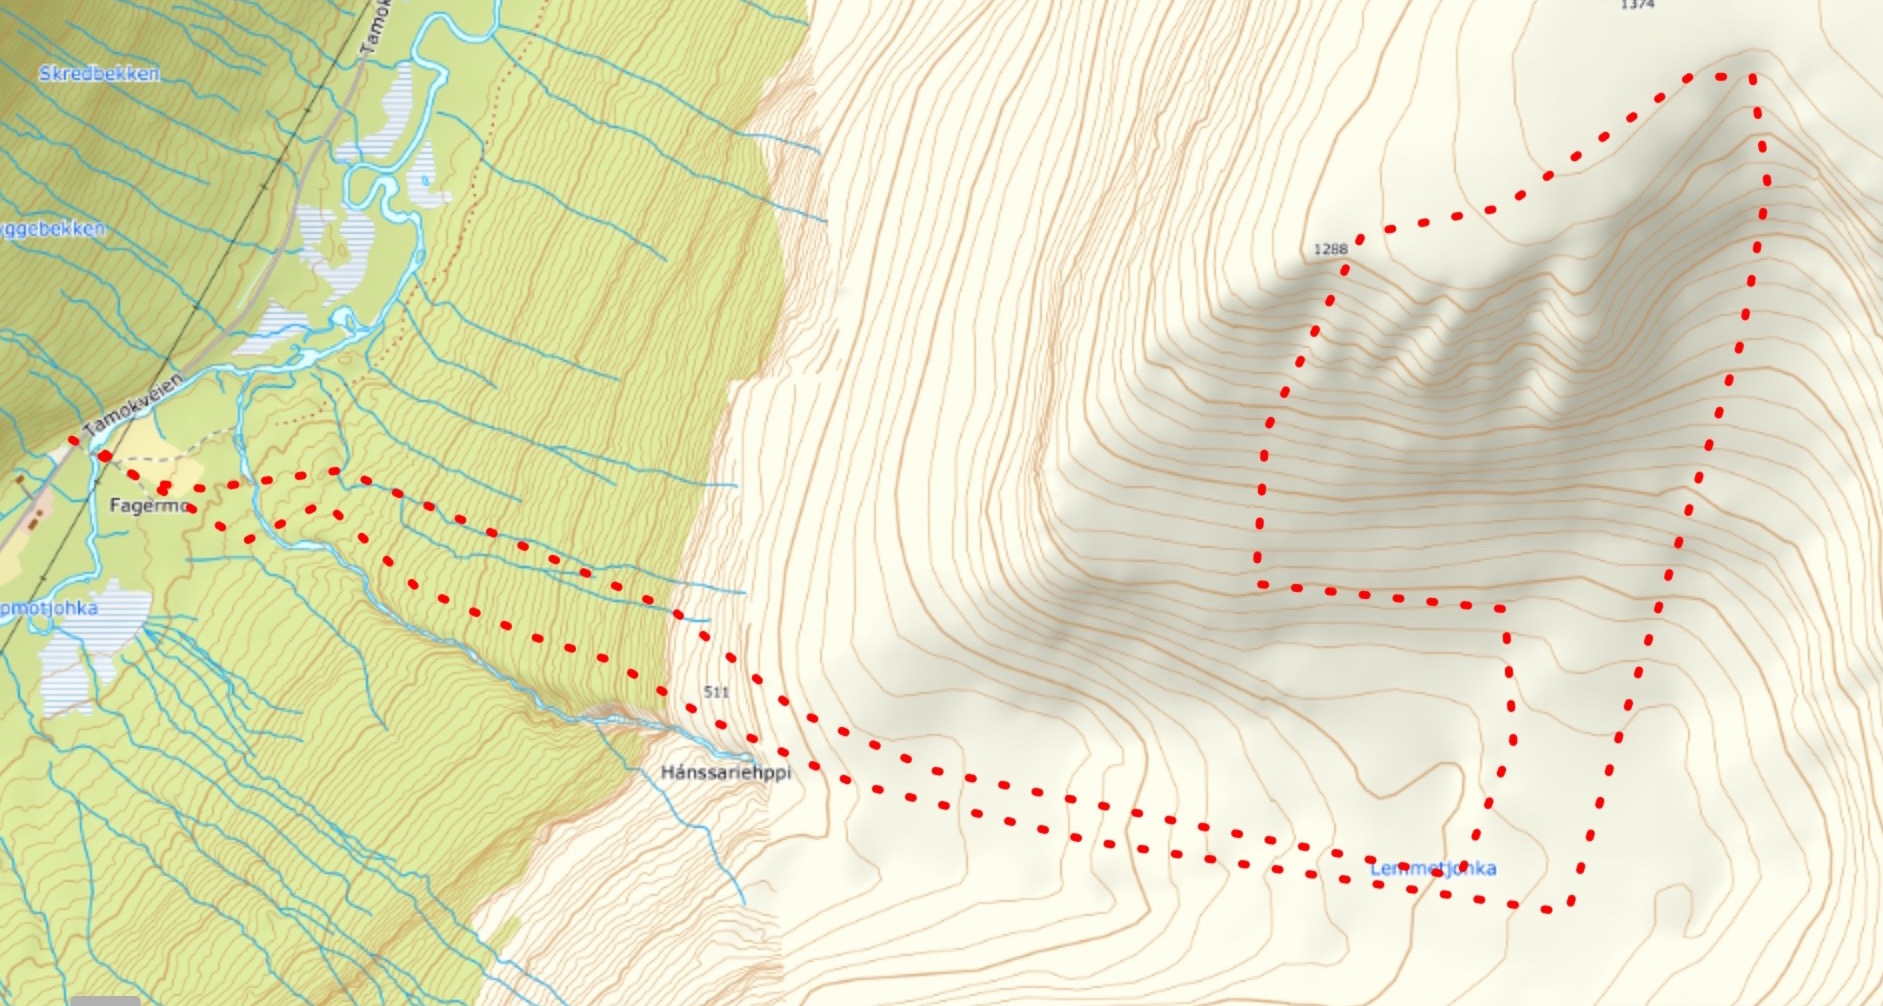 A topographical Map of the climbing route up the Kitchen Chutes on Lemetfjellet